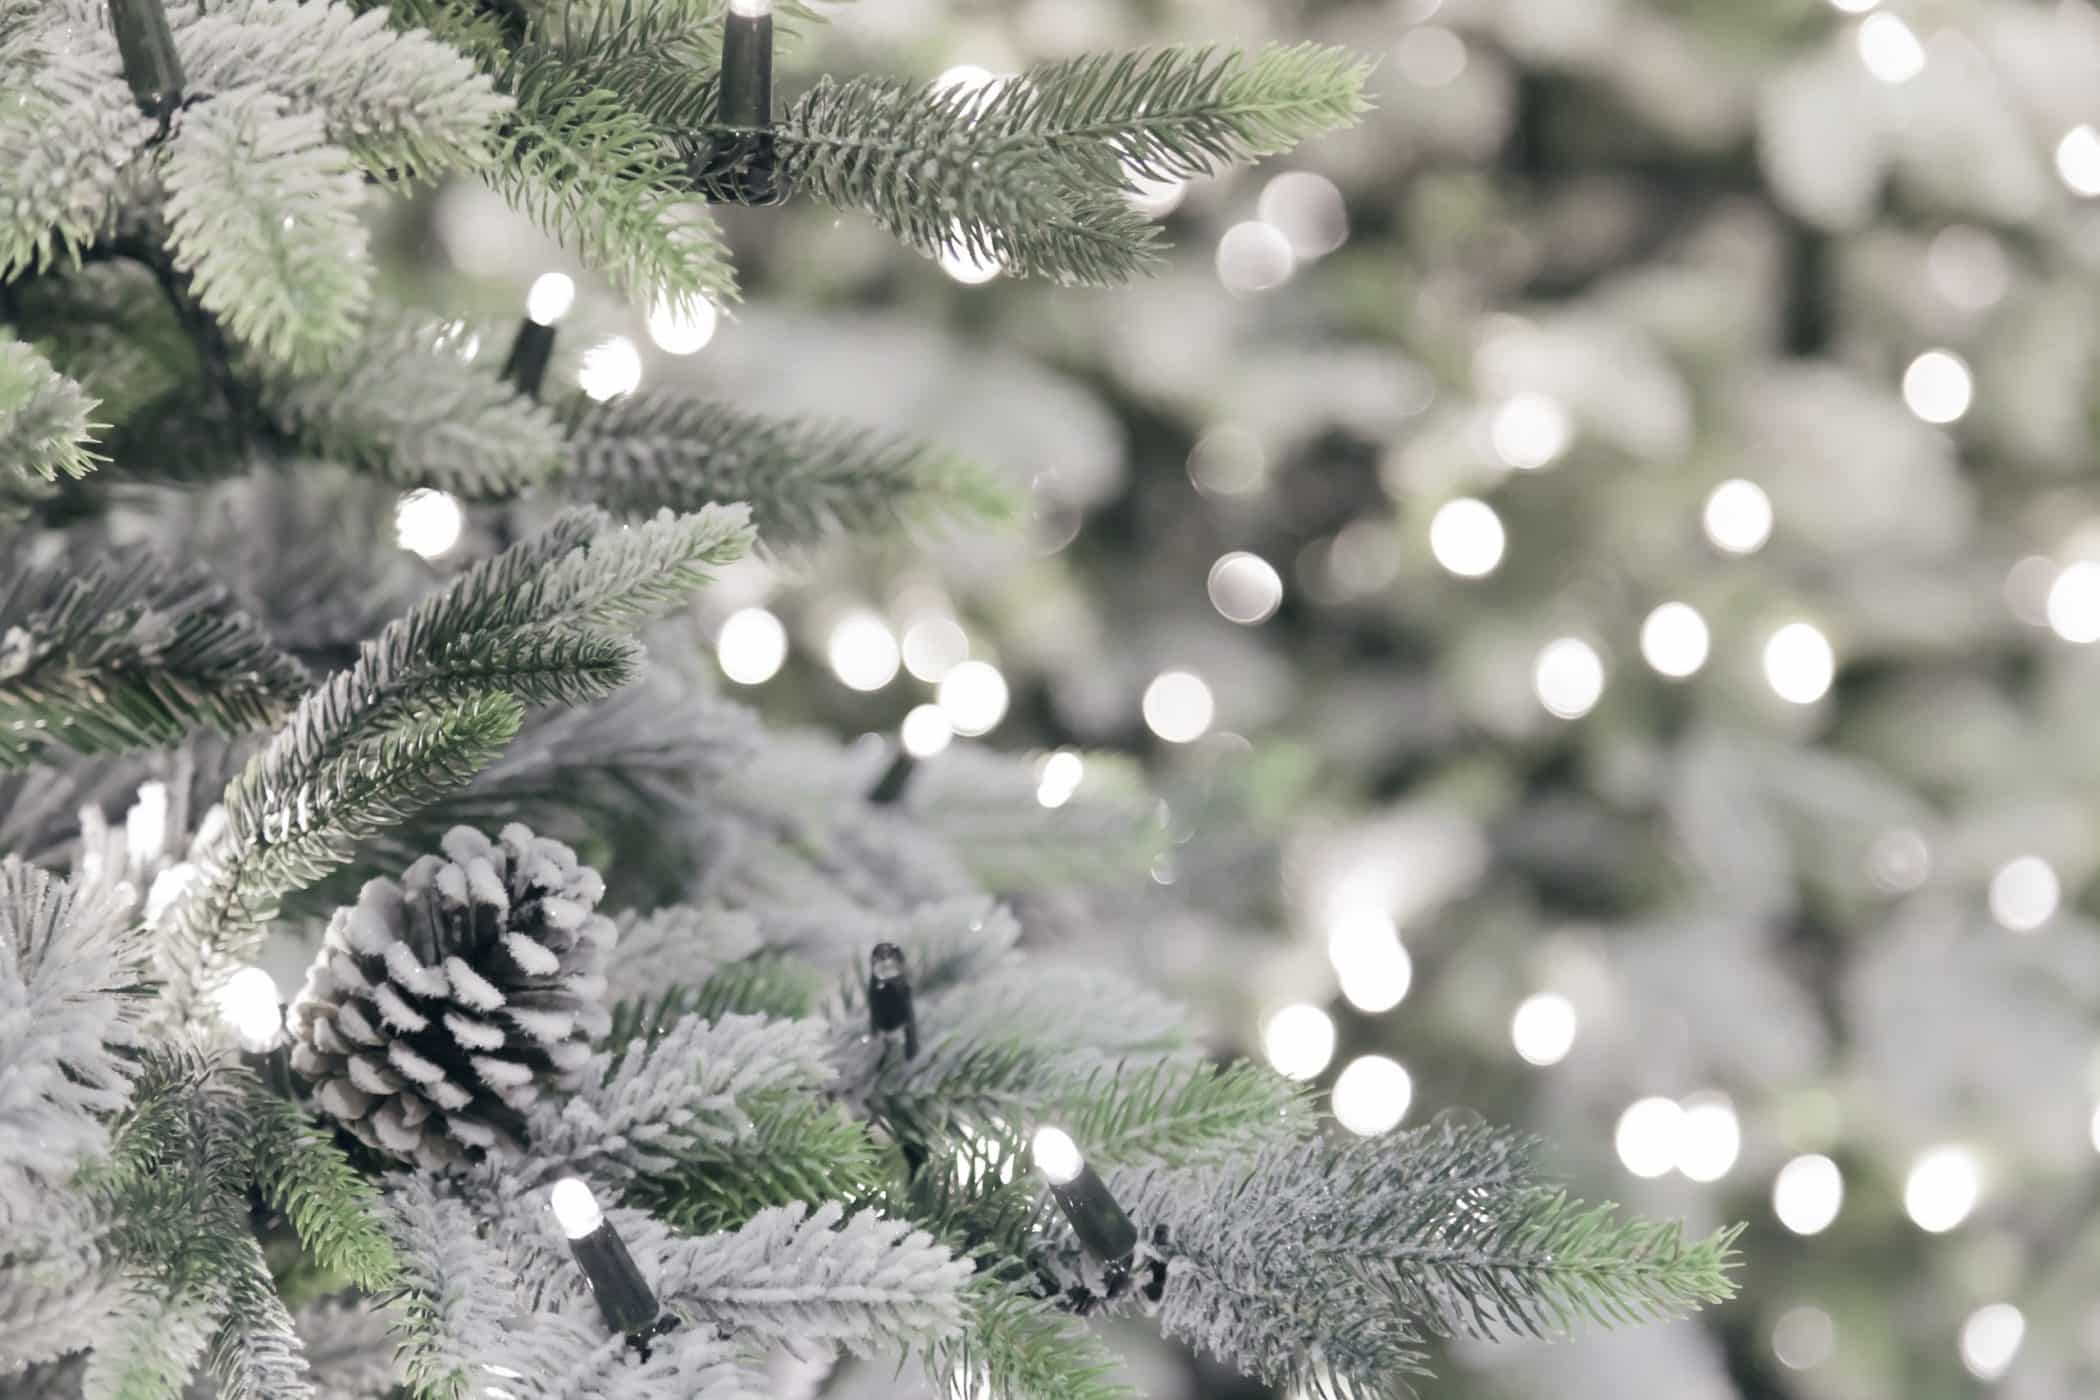 Why choose an artificial Christmas tree?